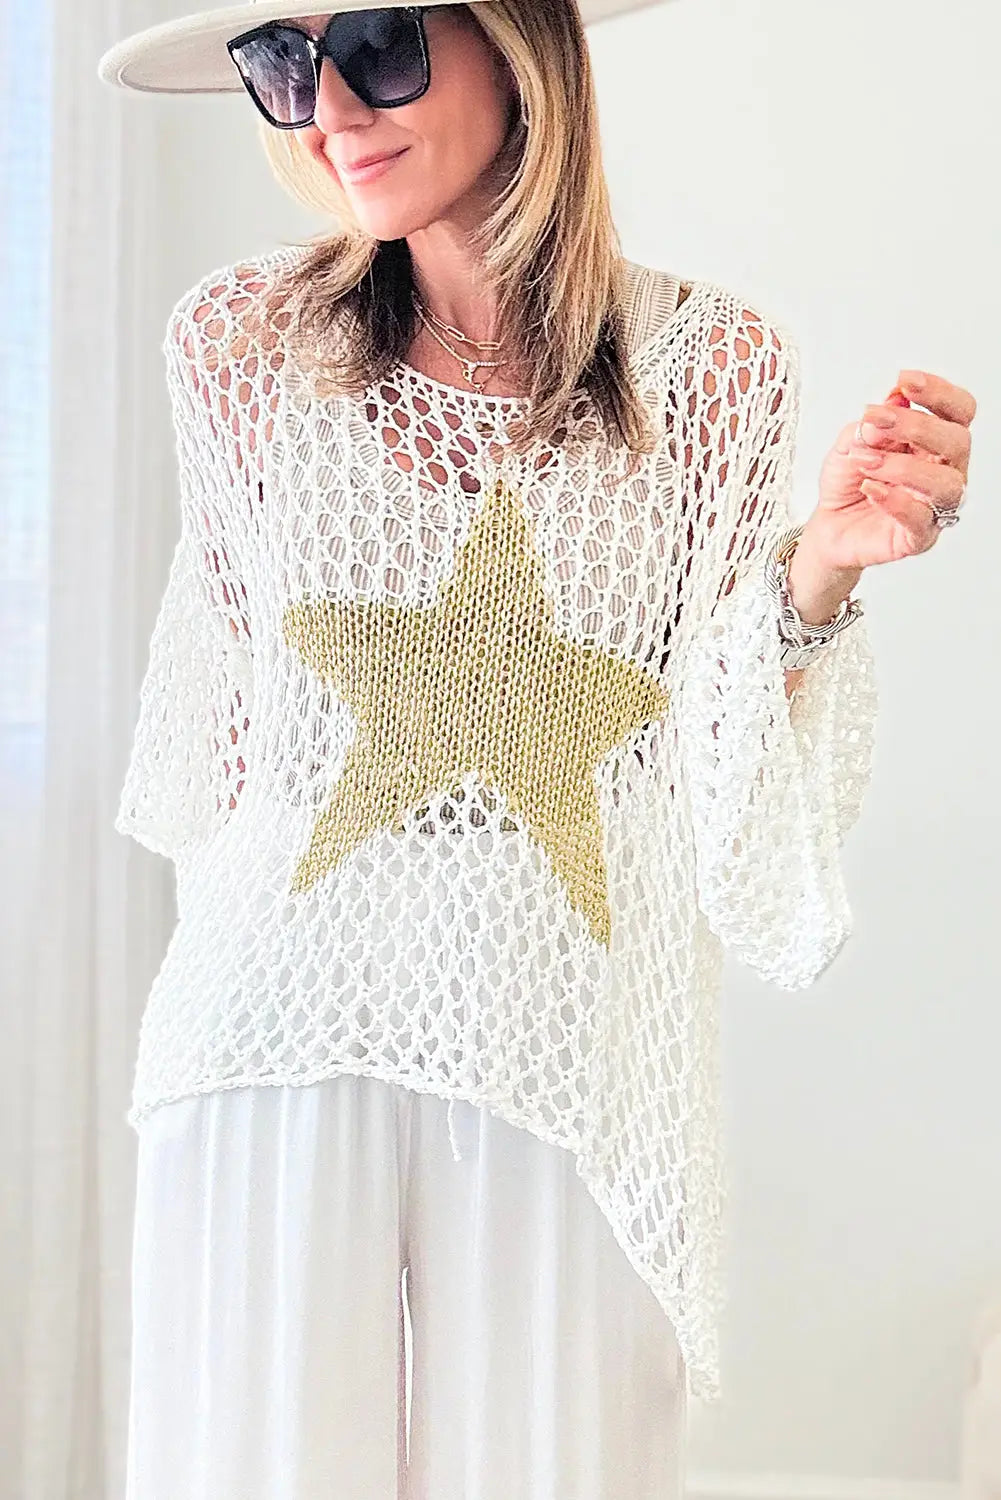 White star graphic crochet summer top - tops/tops & tees